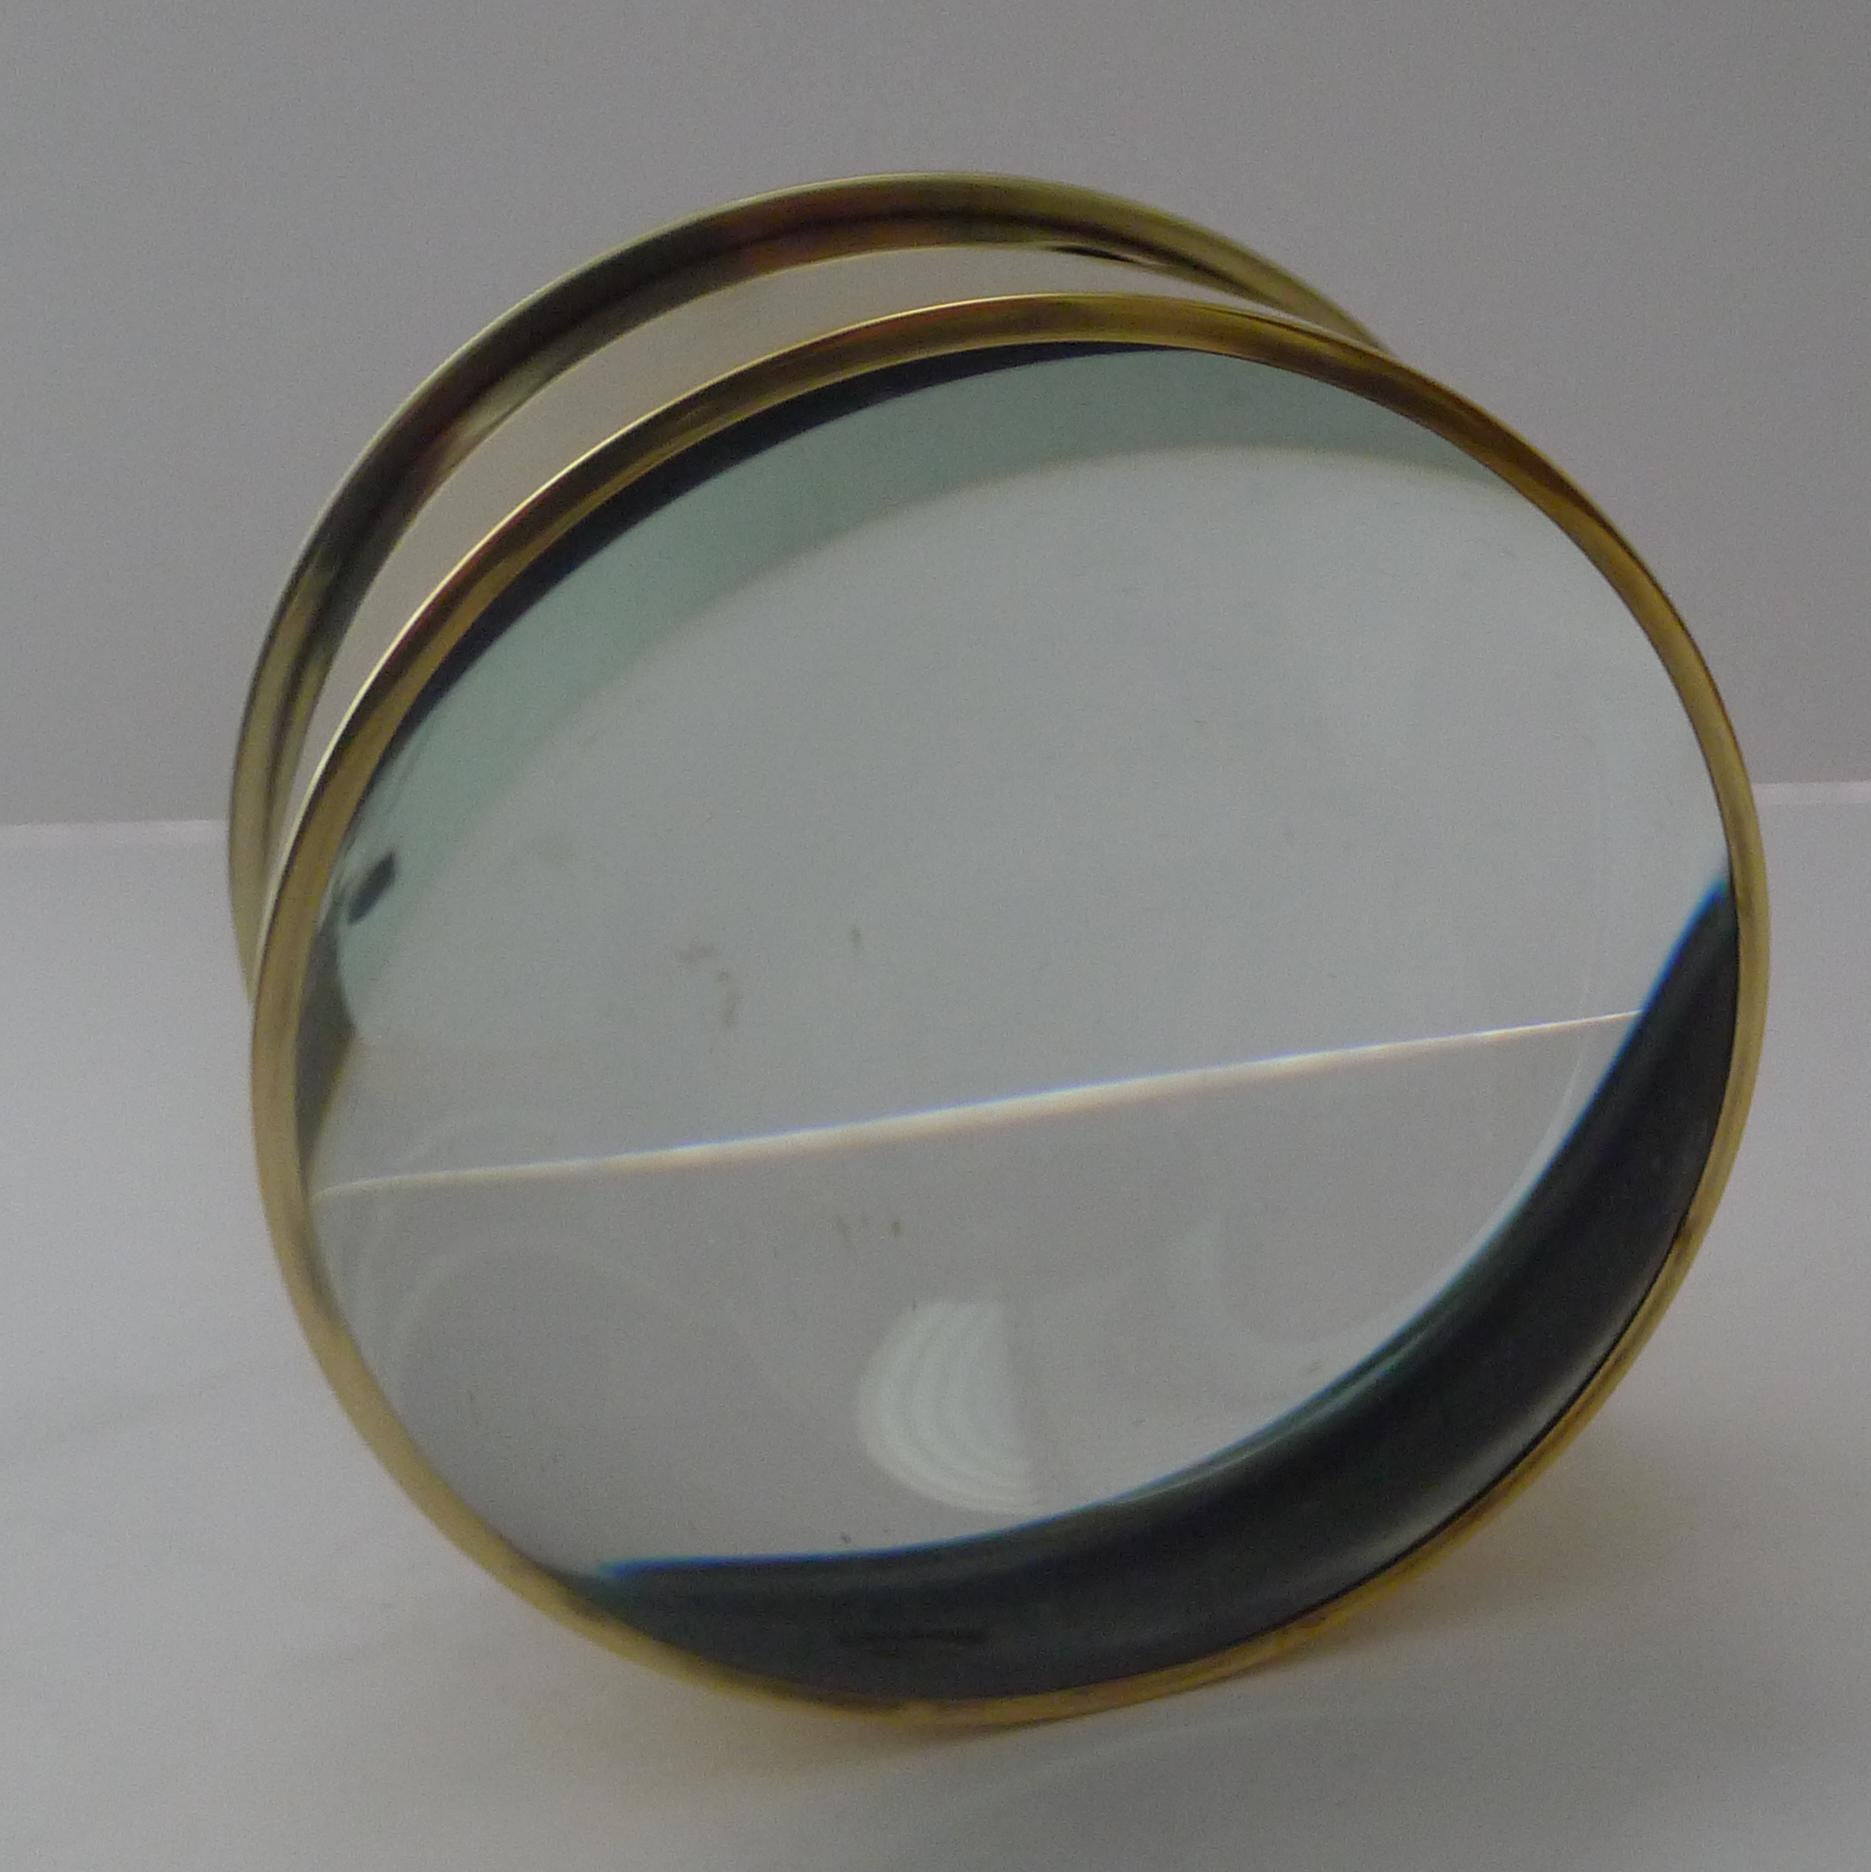 Large English Antique Brass Desk Magnifying Glass / Paperweight c.1910 In Good Condition For Sale In Bath, GB